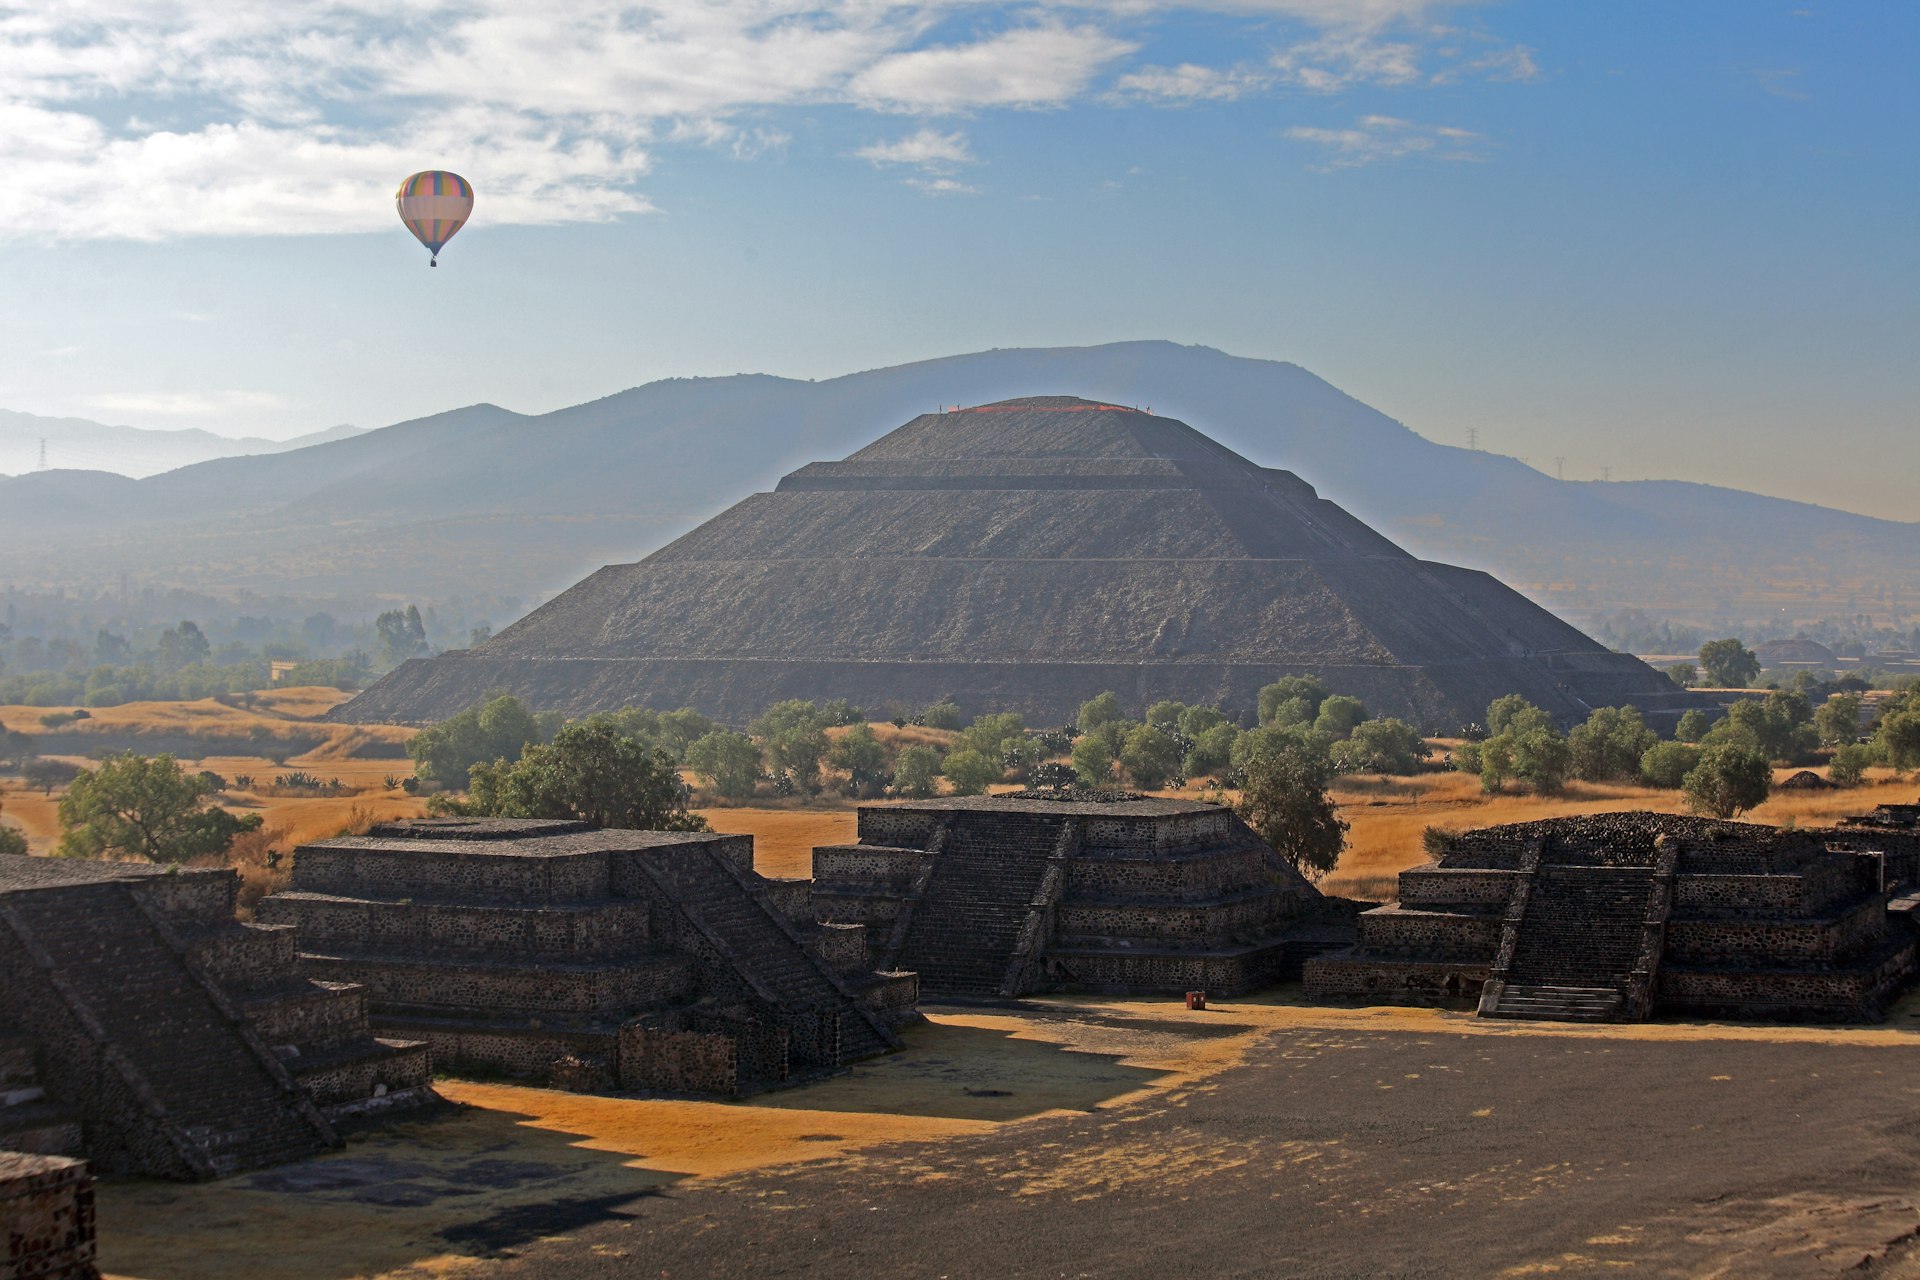 An air balloon floats near the Pyramid of the Sun, as seen from the Pyramid of the Moon, Teotihuacan